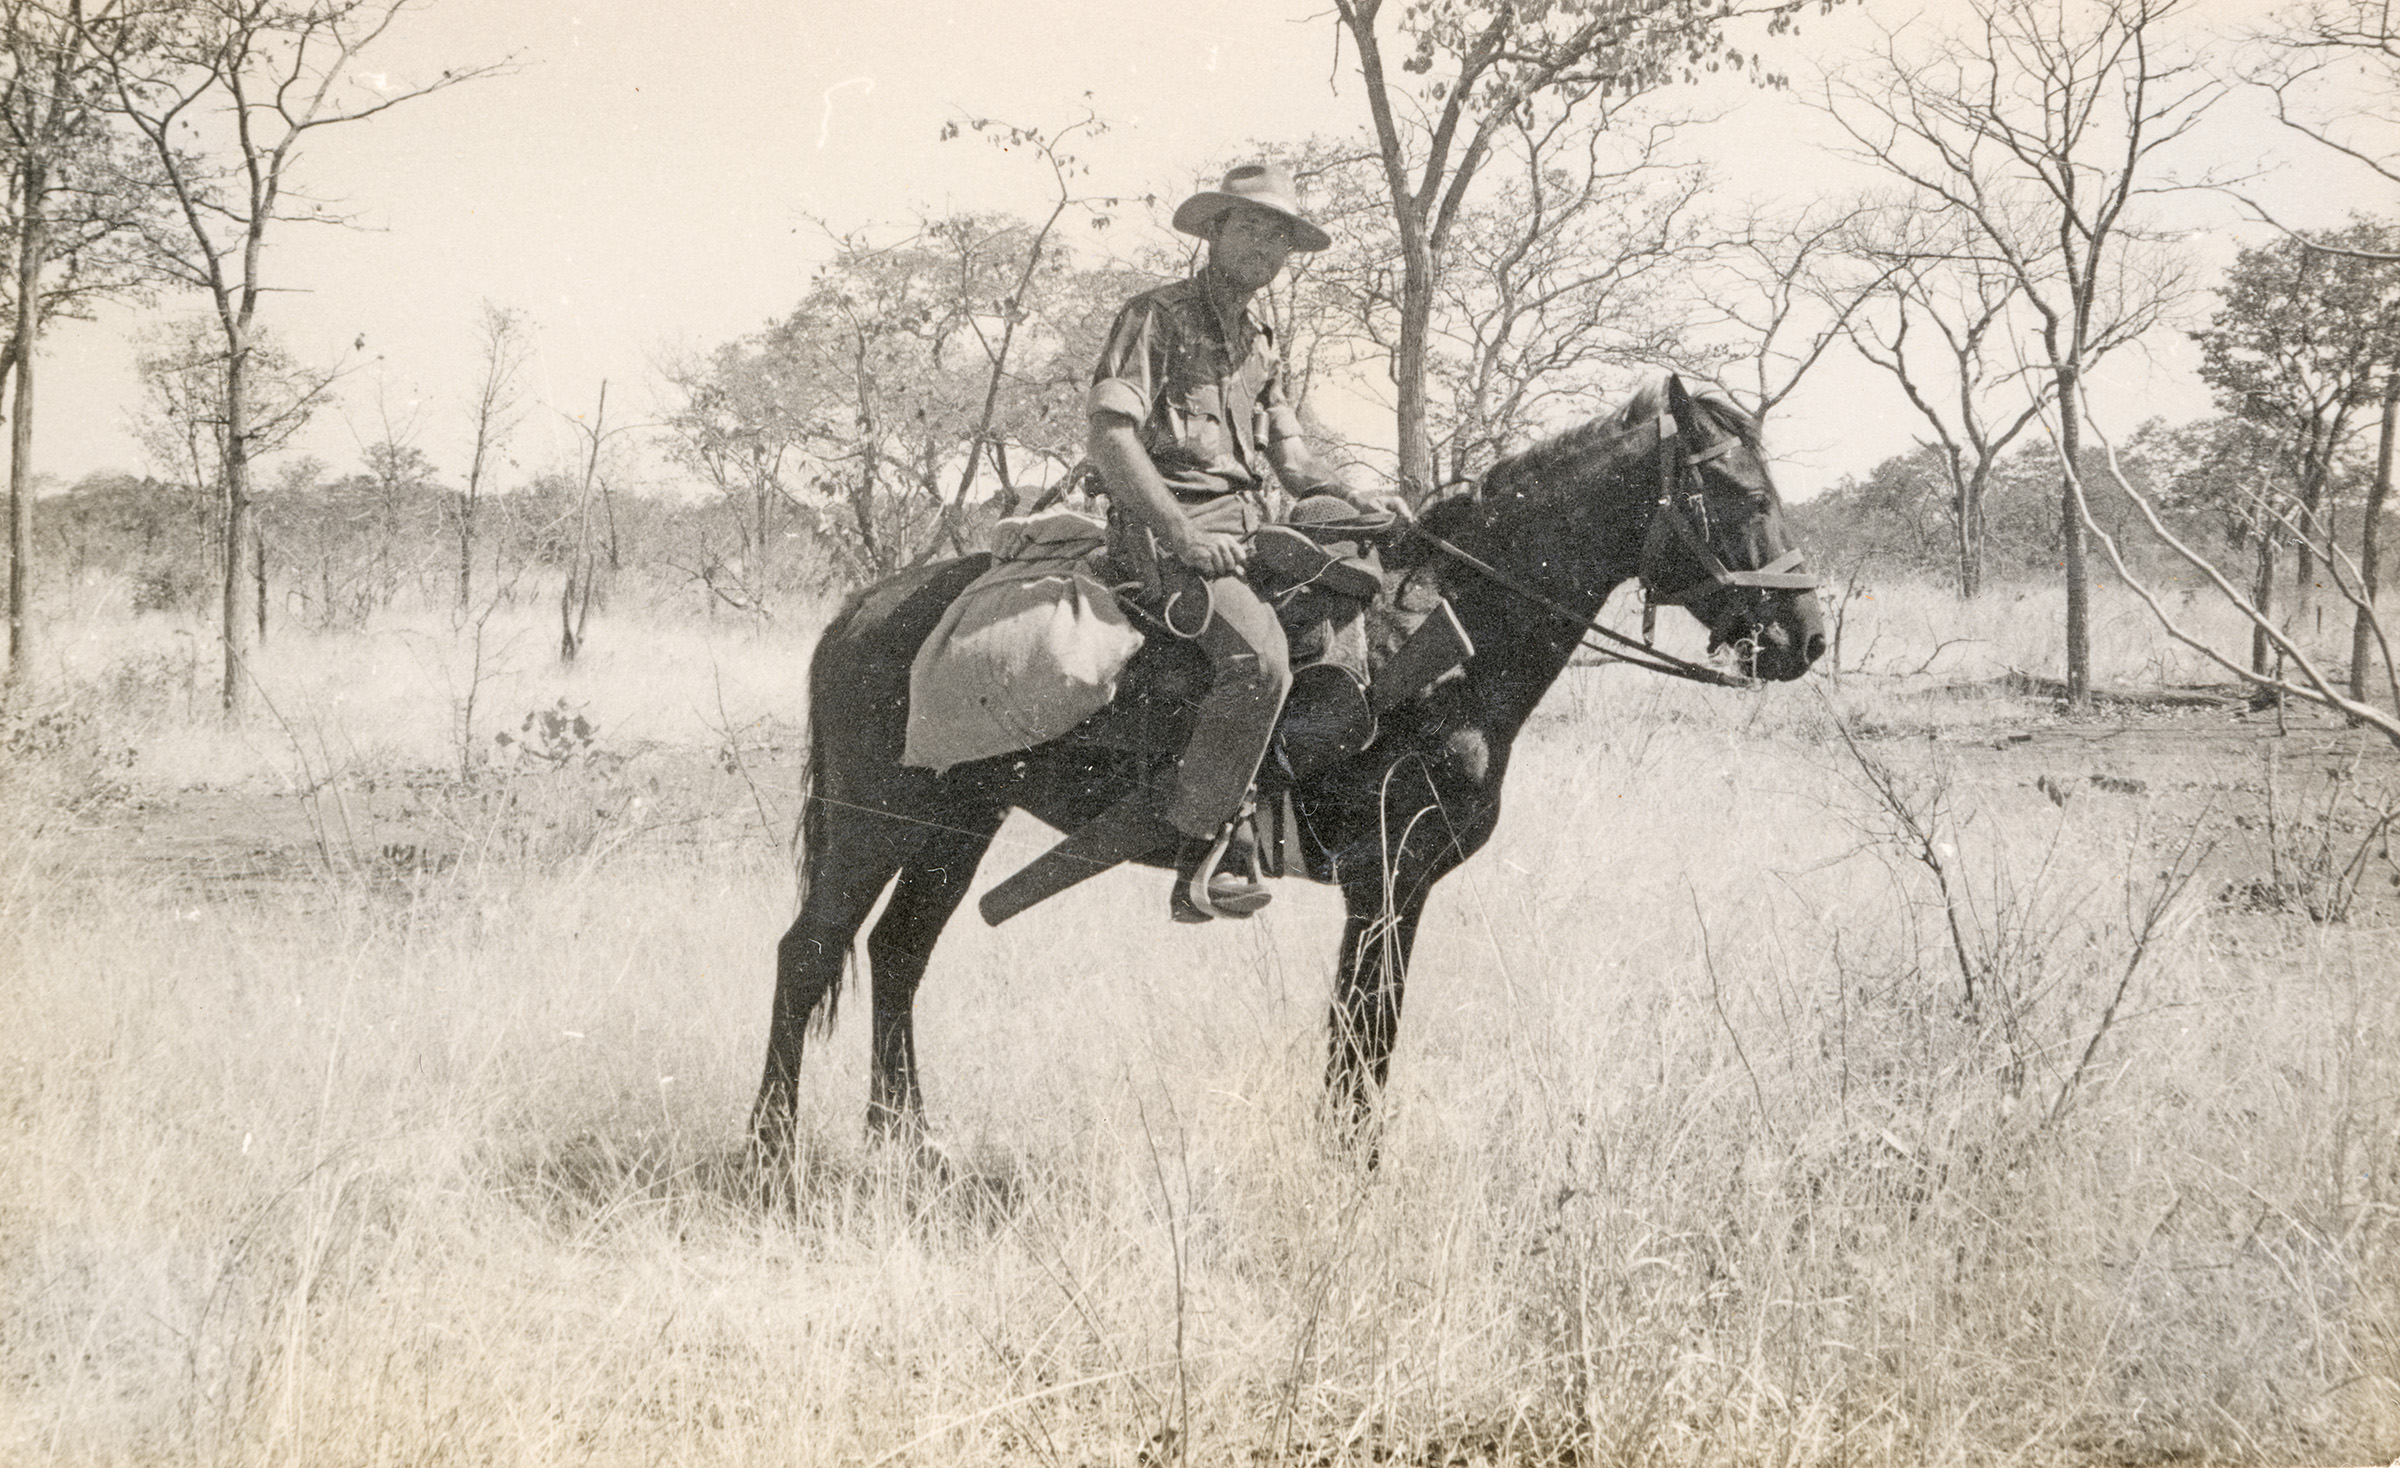 Allan Savory on a horse in the African bush